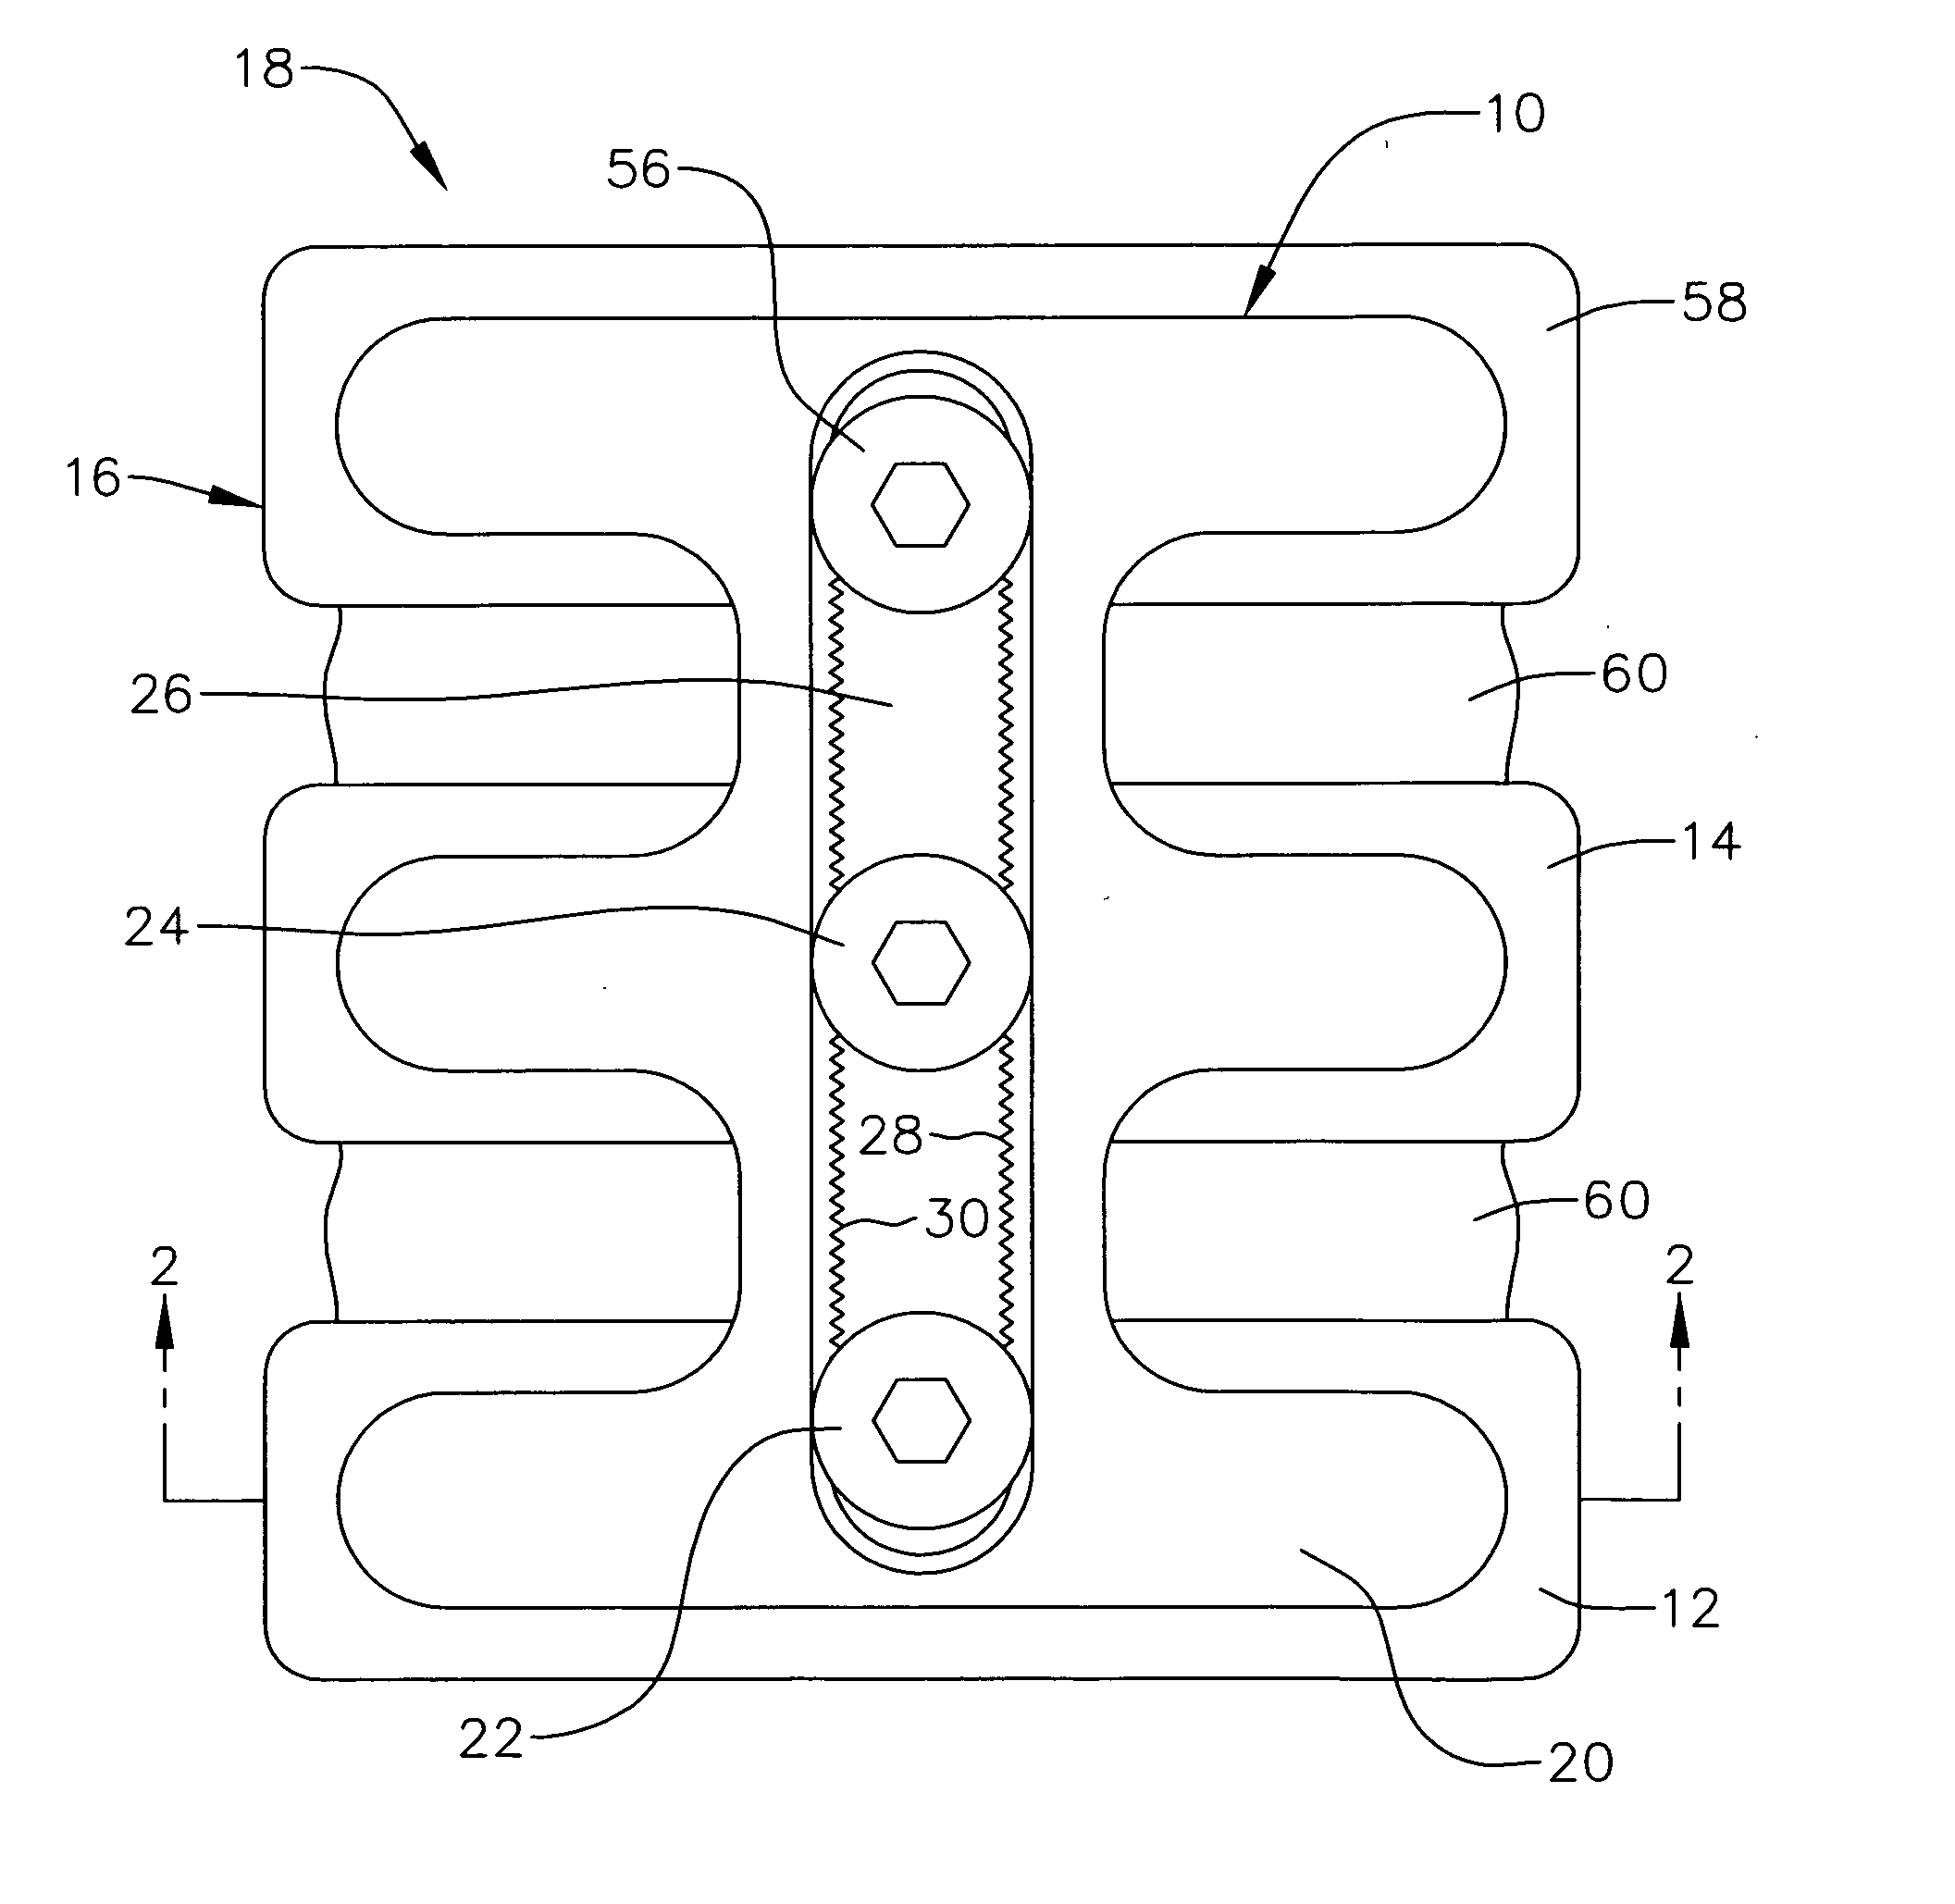 Spinal-column buttress plate assembly and method for attachment